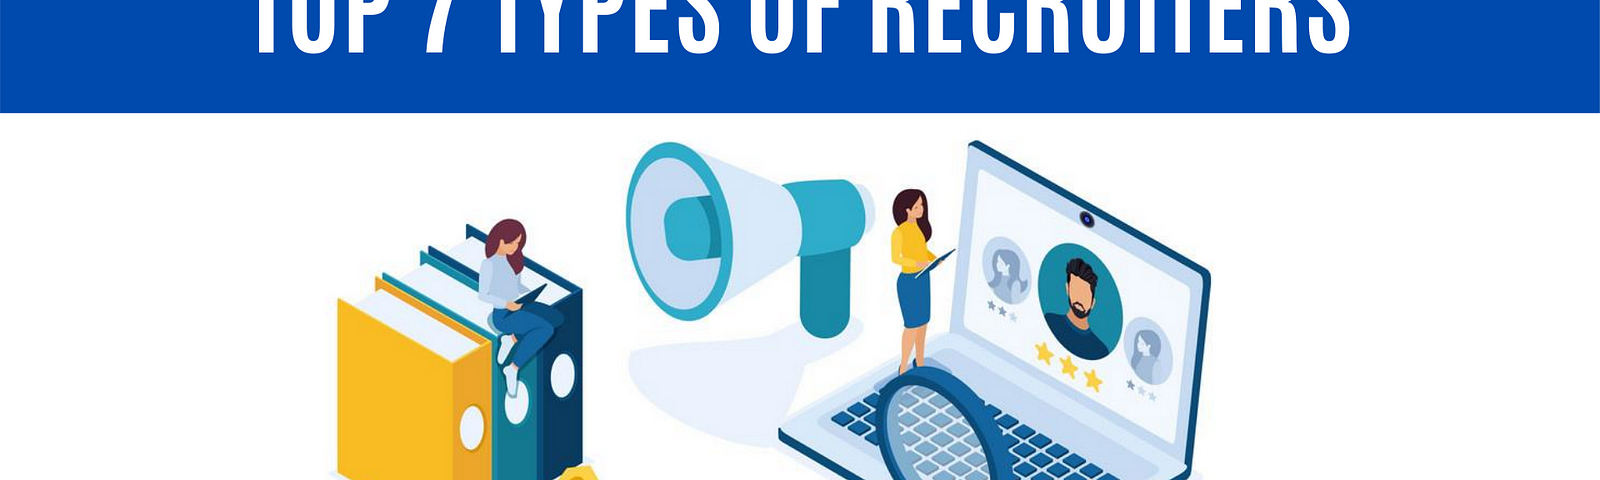 Top 7 Types of Recruiters